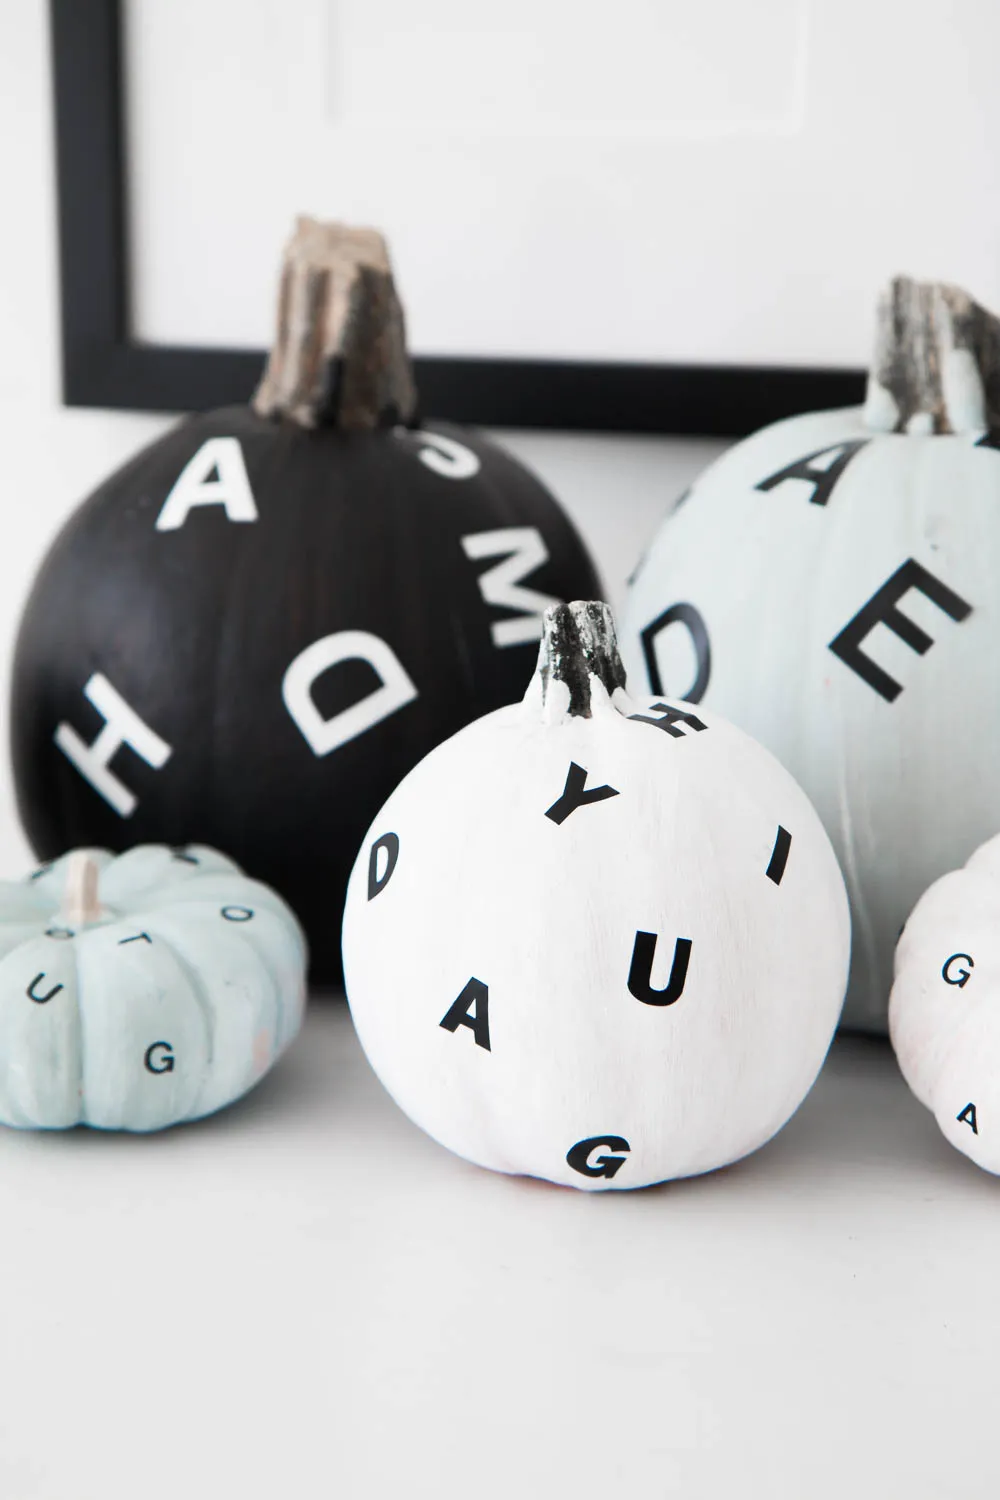 Flying letter easy pumpkin painting ideas